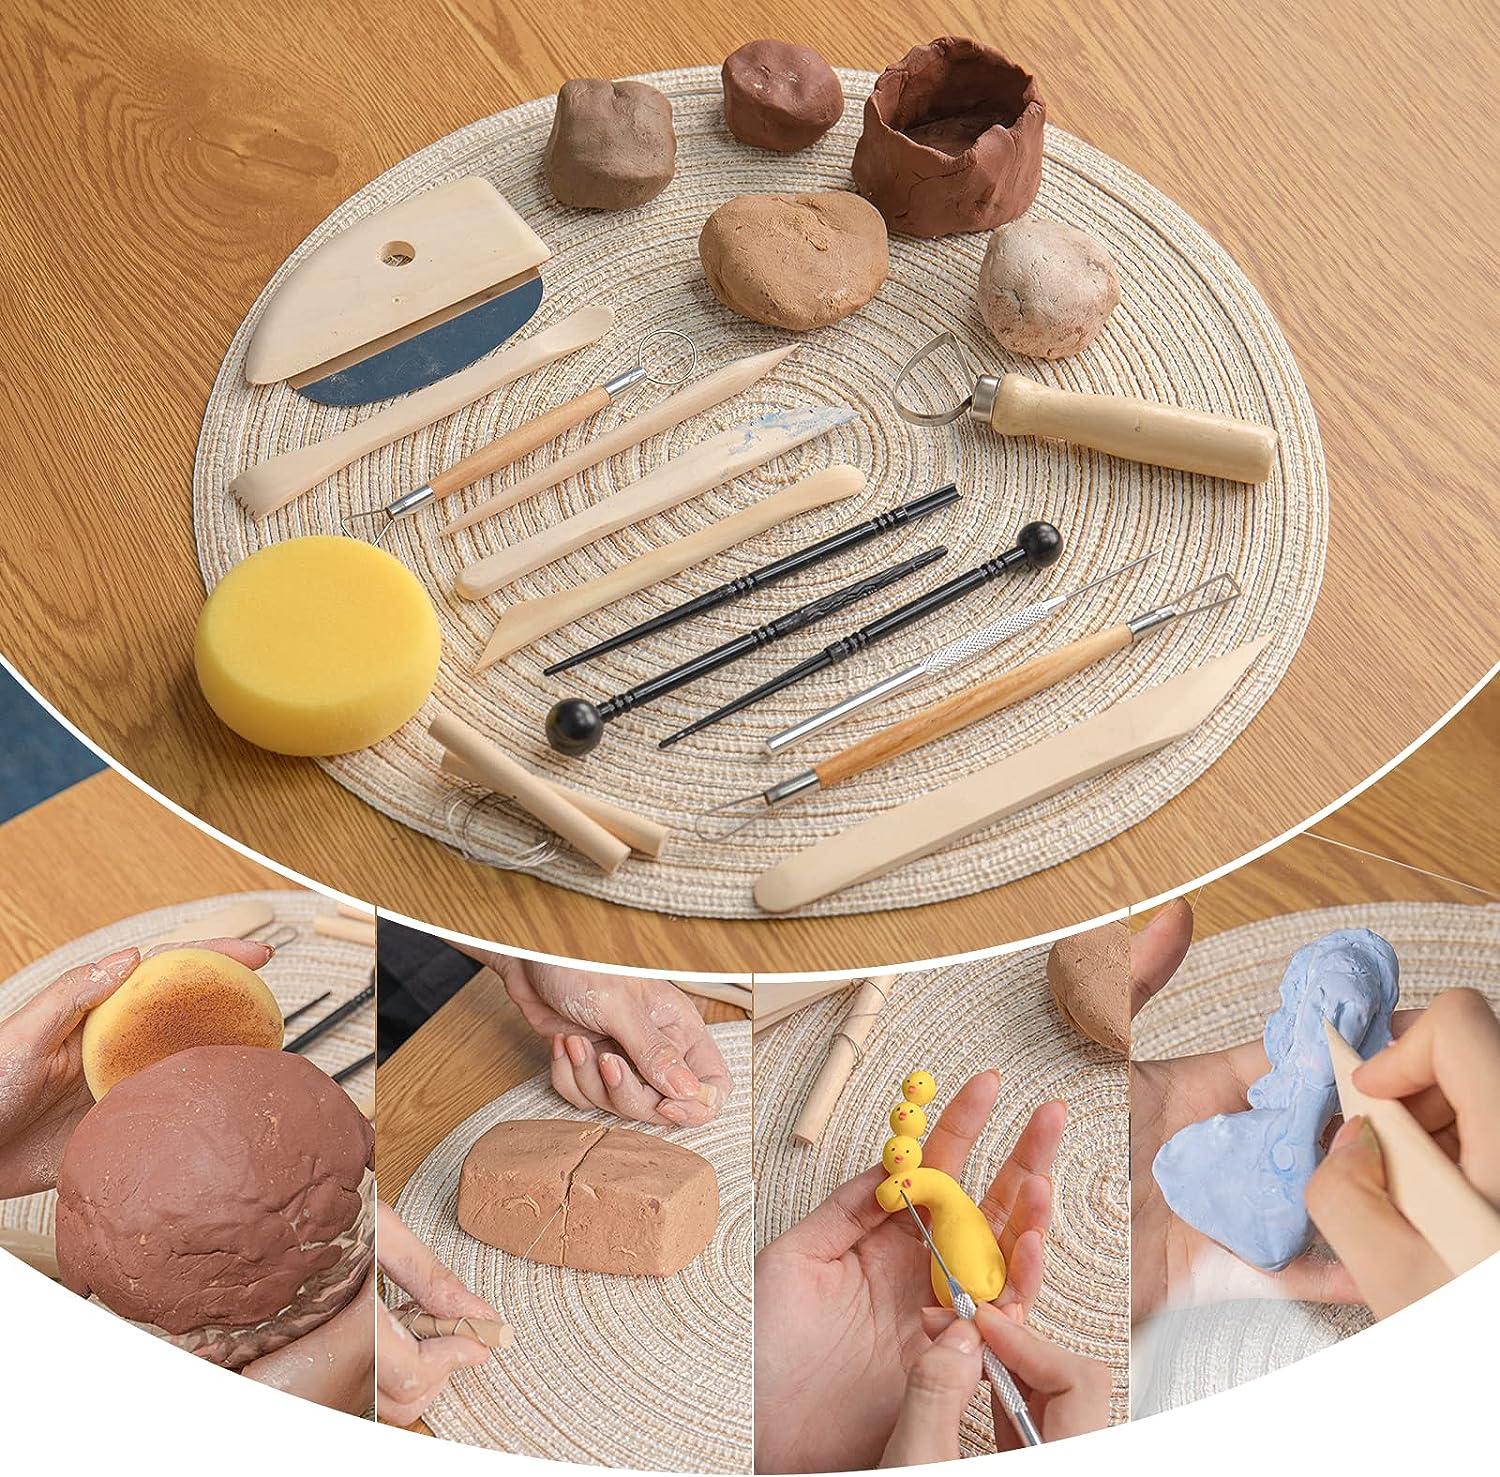 Polymer Clay Tools 18pcs Modeling Clay Sculpting Tools